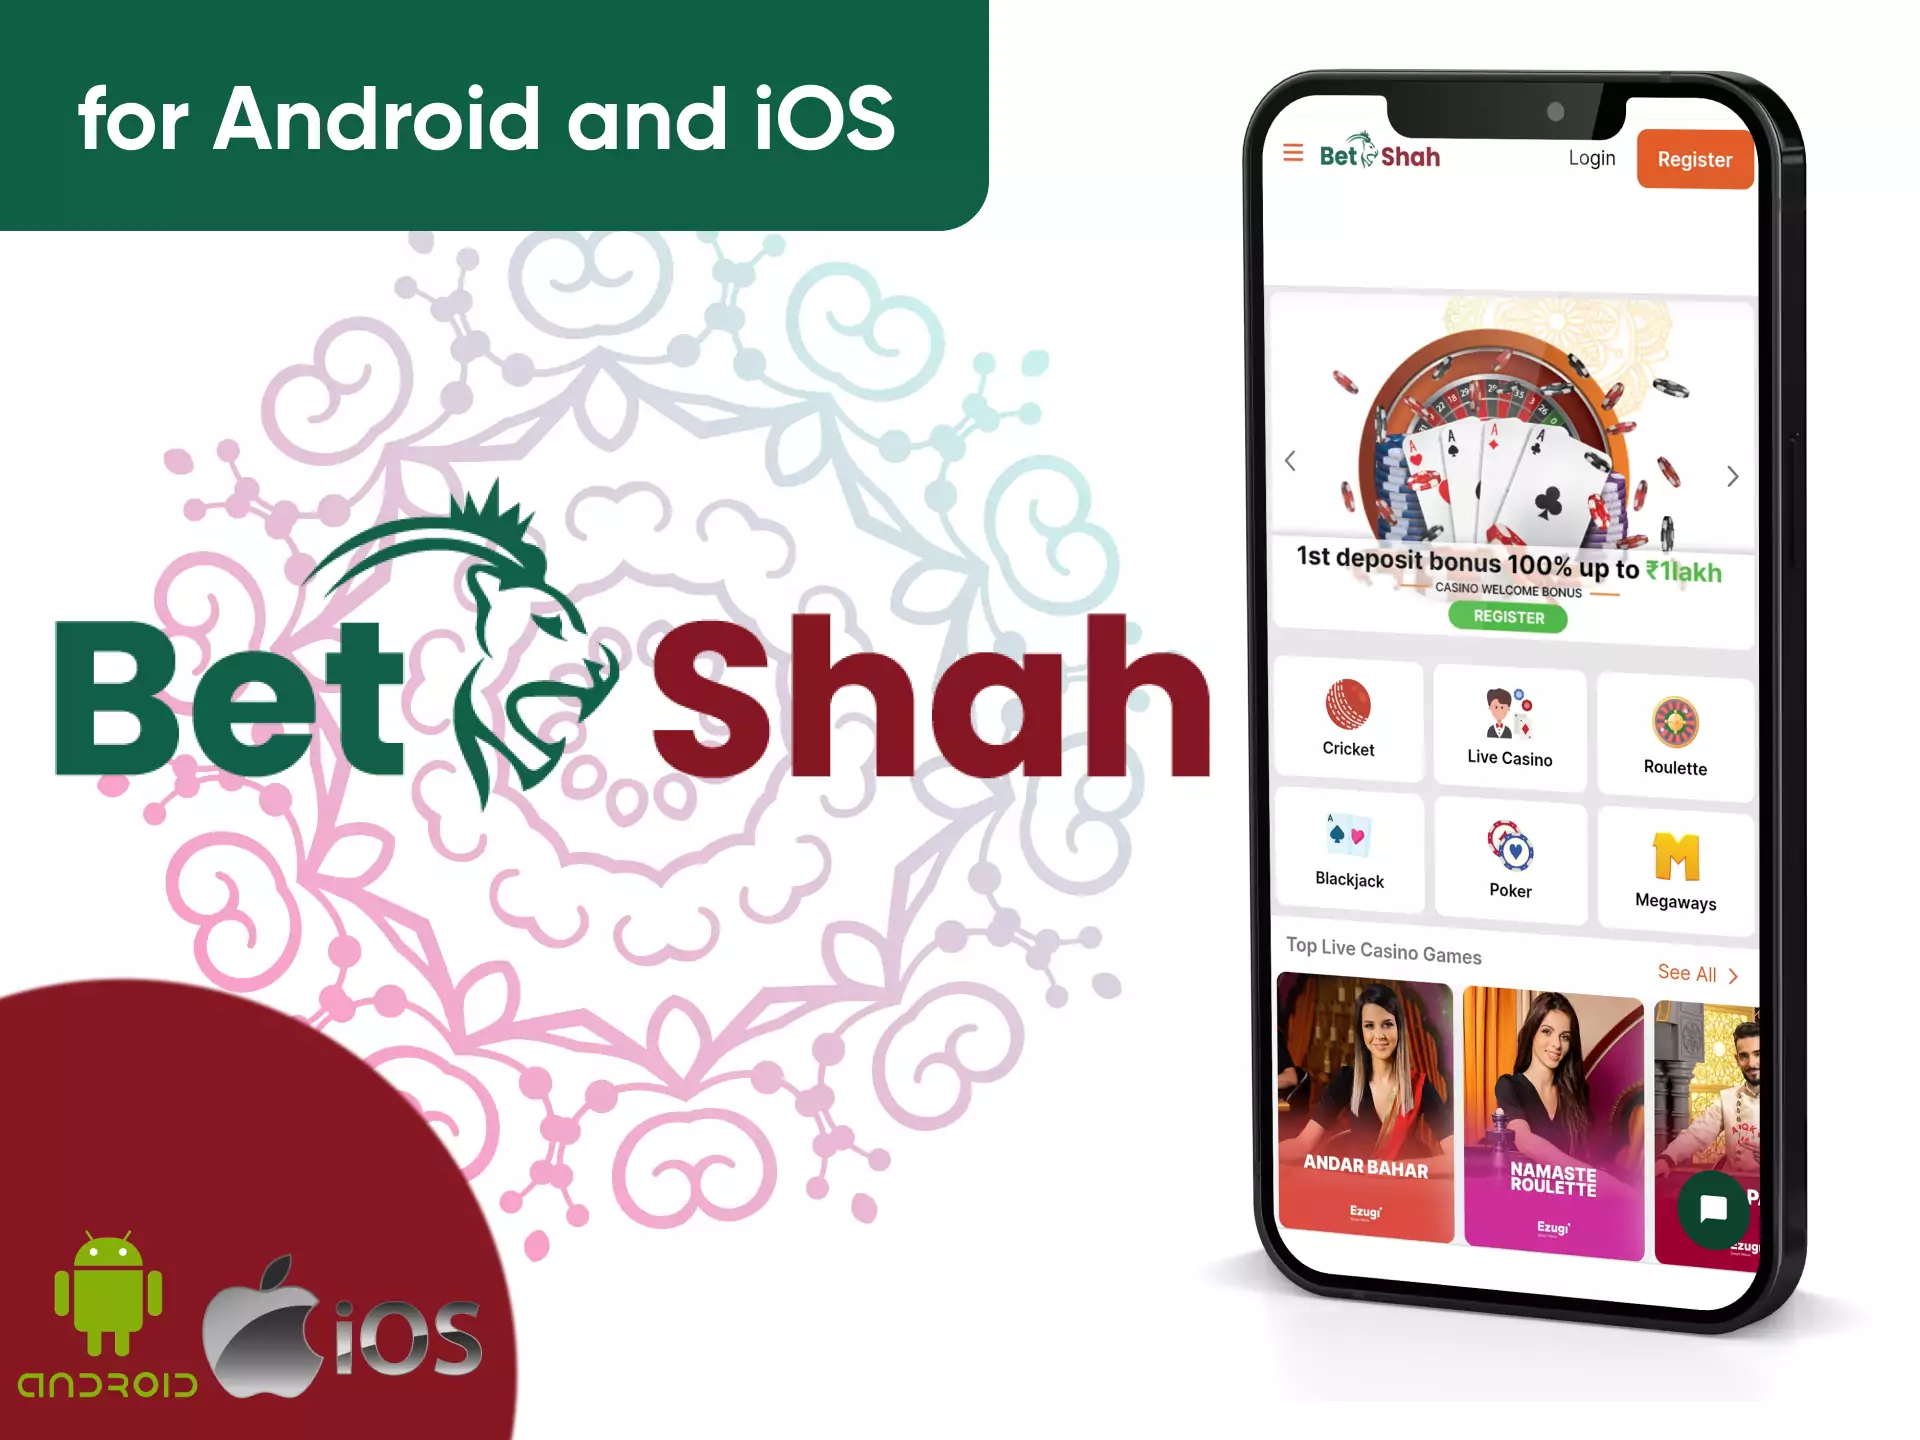 Use your mobile devices on Android or iOS to place bets on Betshah.